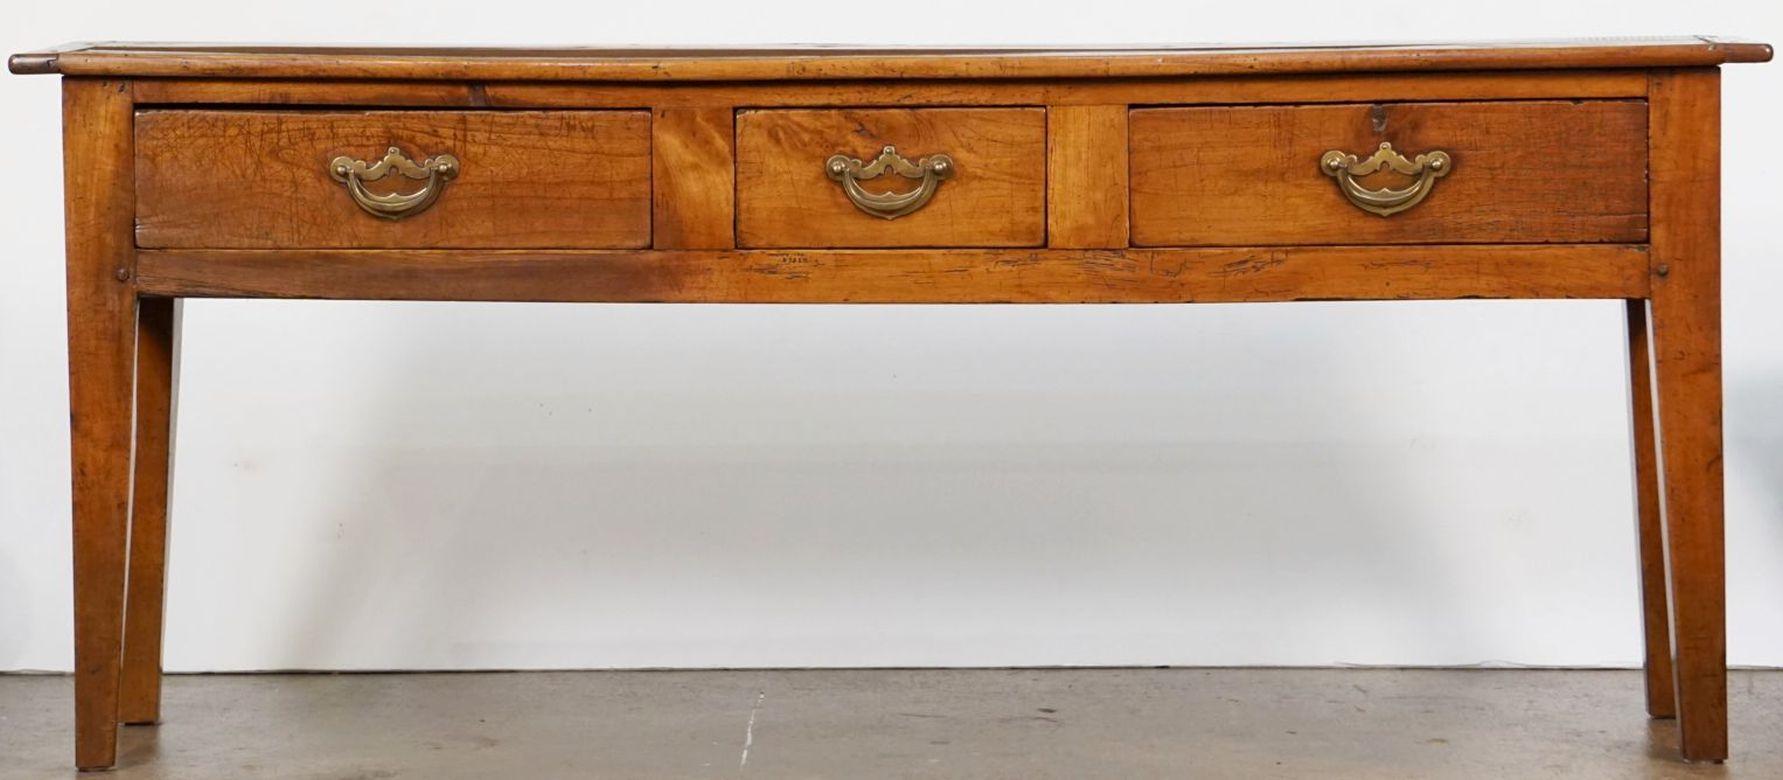 A handsome French console sideboard (or serving table) of patinated cherrywood, featuring a rectangular plank top over a frieze with three drawers, each with brass hardware pulls, paneled back and sides, and resting on tapering square legs.